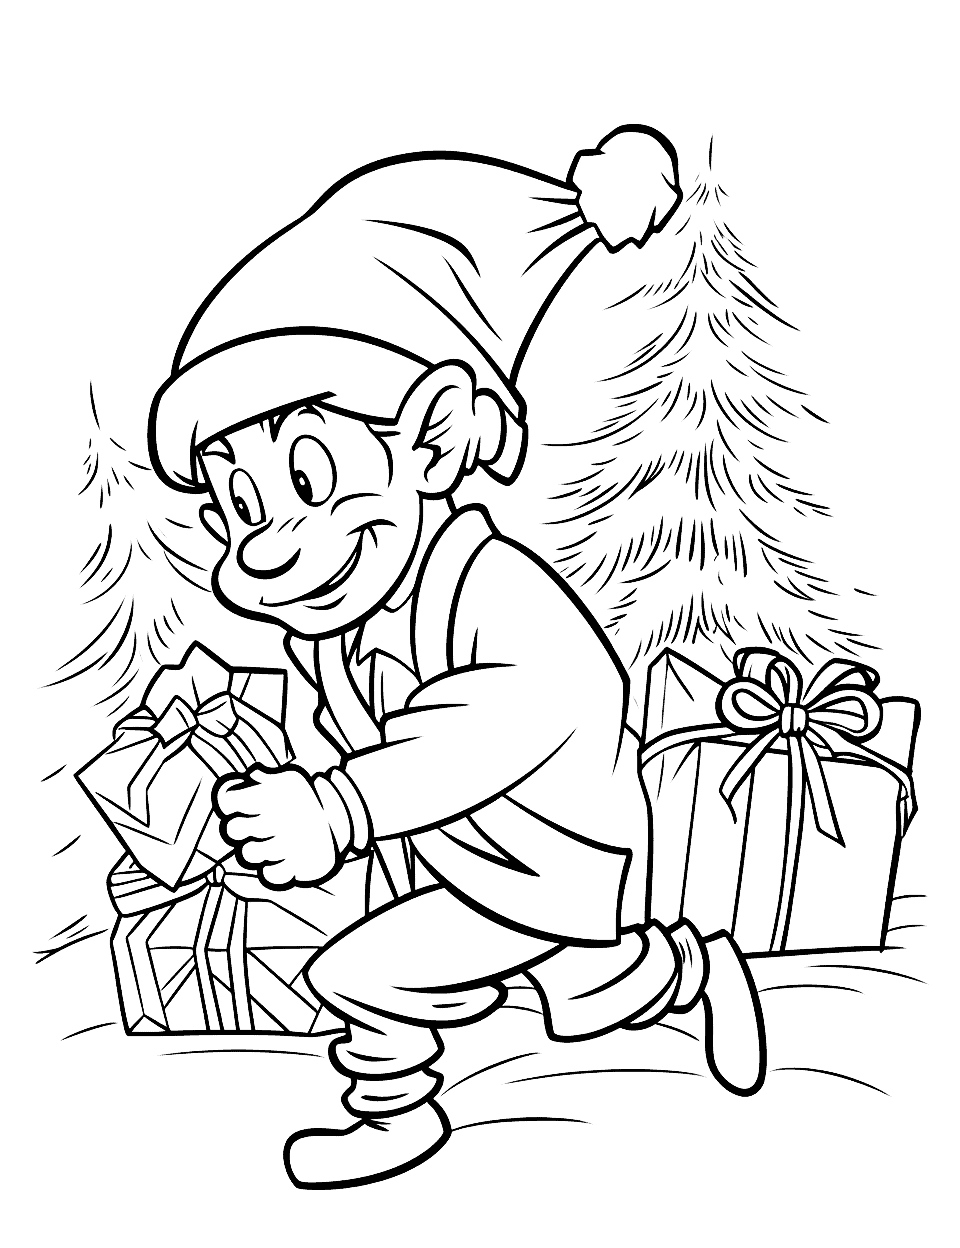 Grinch Stealing Christmas Coloring Page - A coloring page depicting the Grinch sneaking around stealing presents.